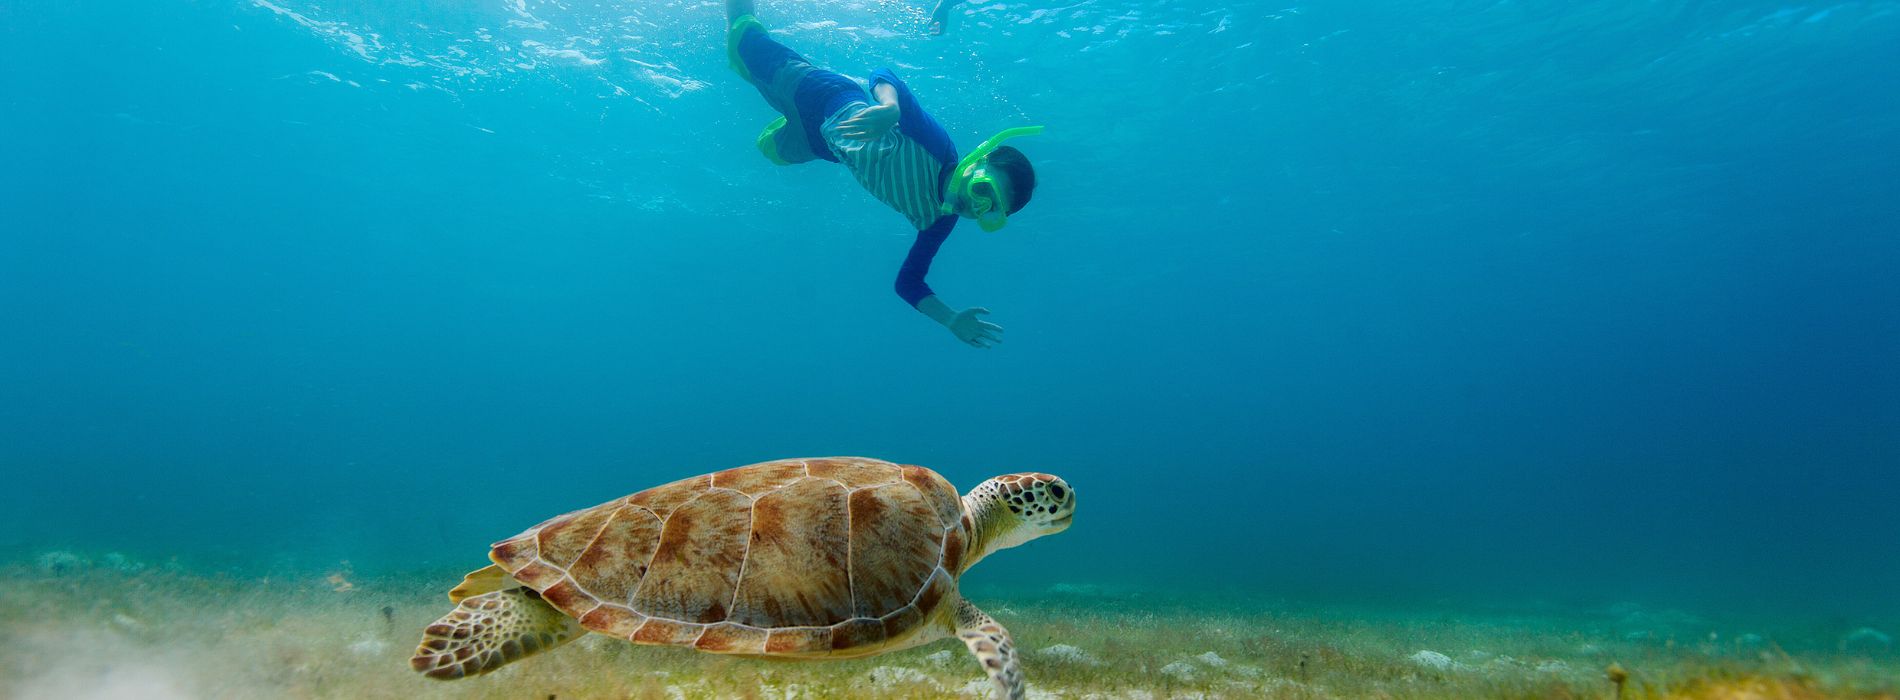 Snorkel with Sea Turtles in Curacao: An Unforgettable Experience